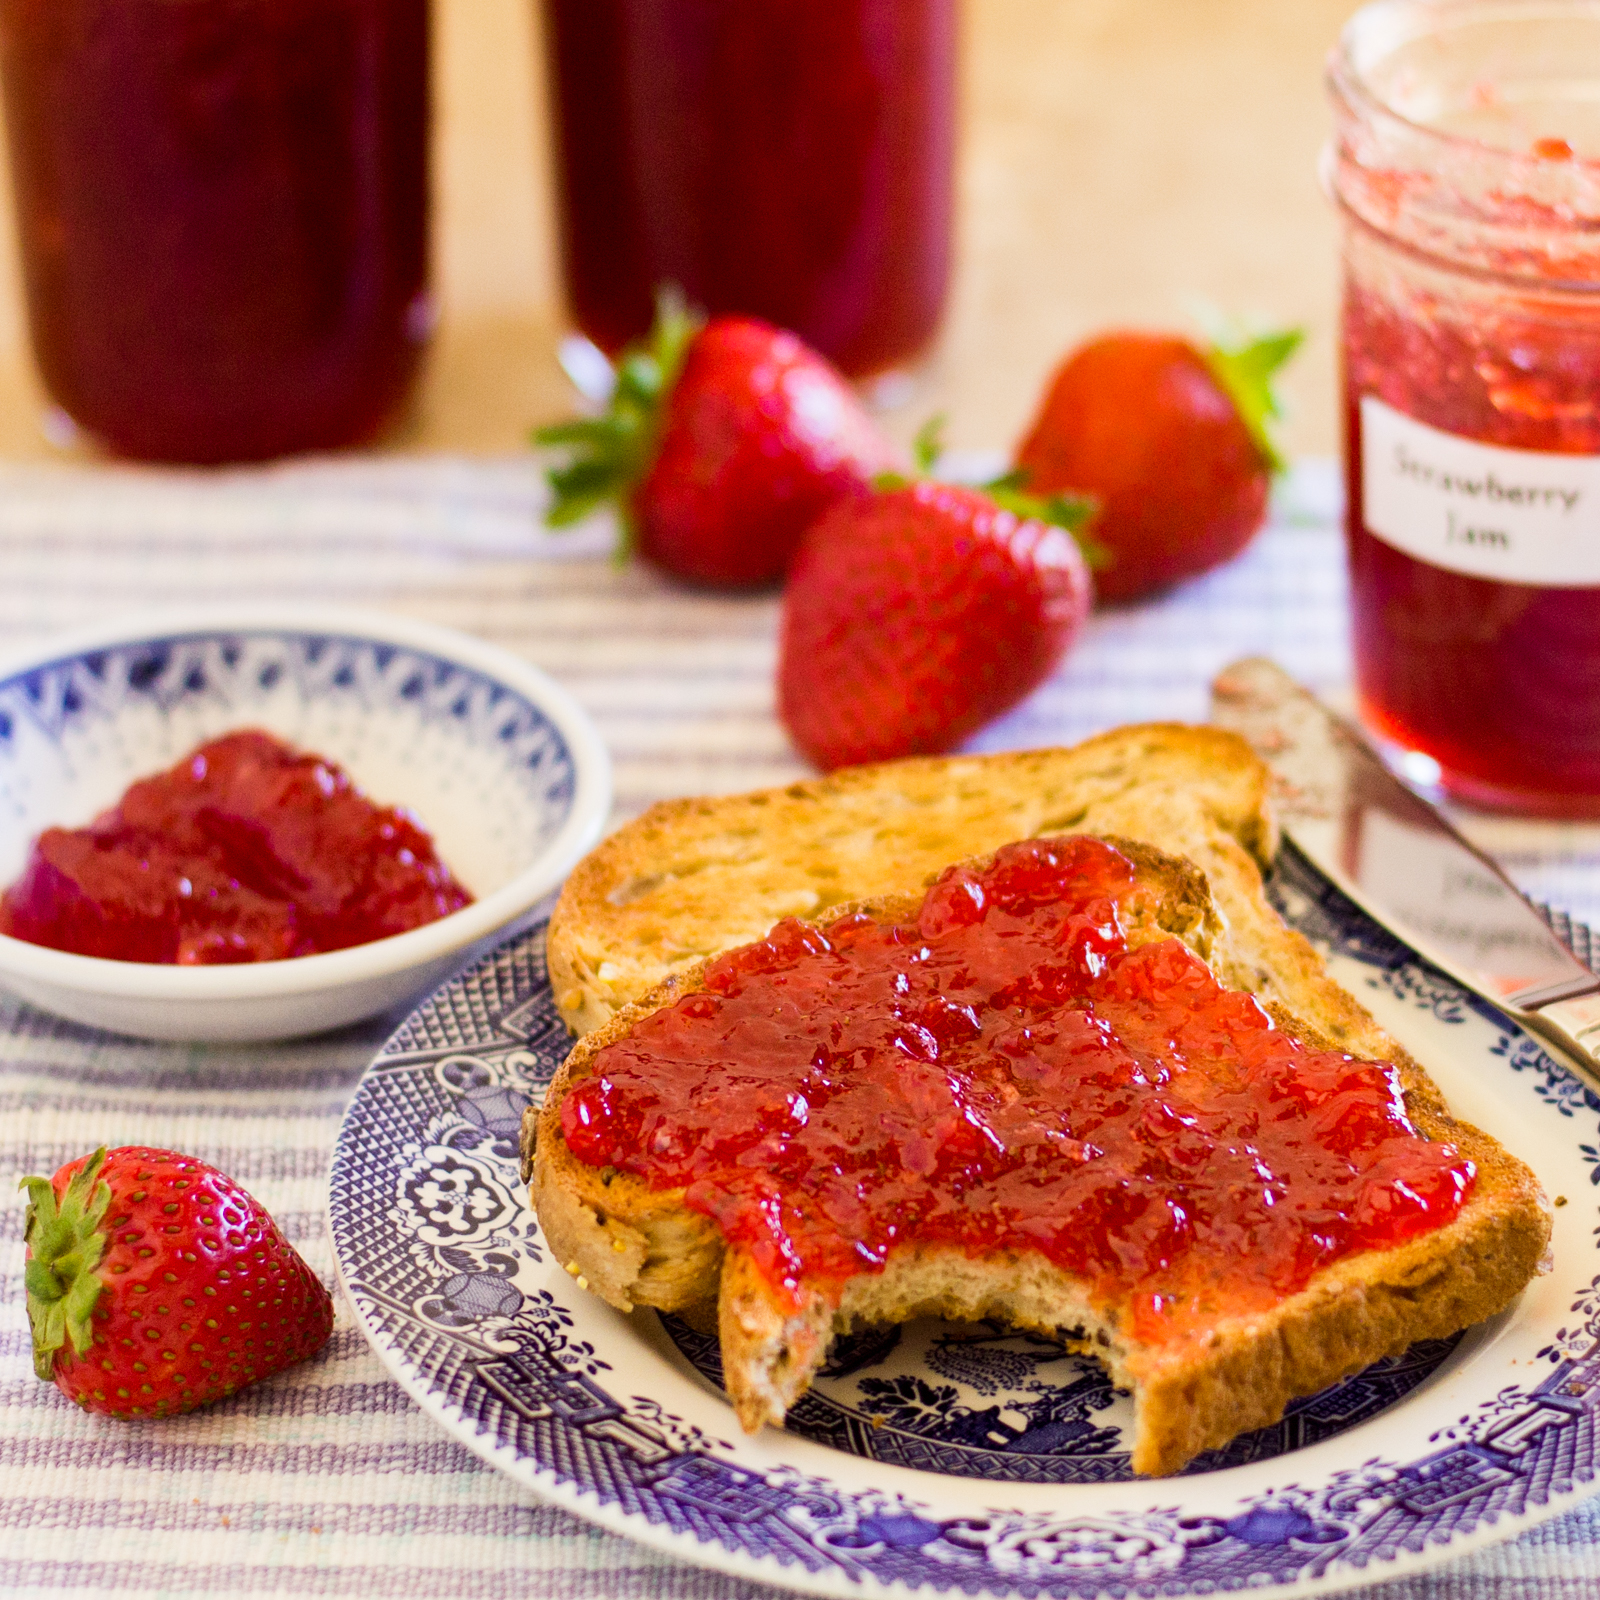 Two slice s of toast with strawberry jam spread on the top slice.